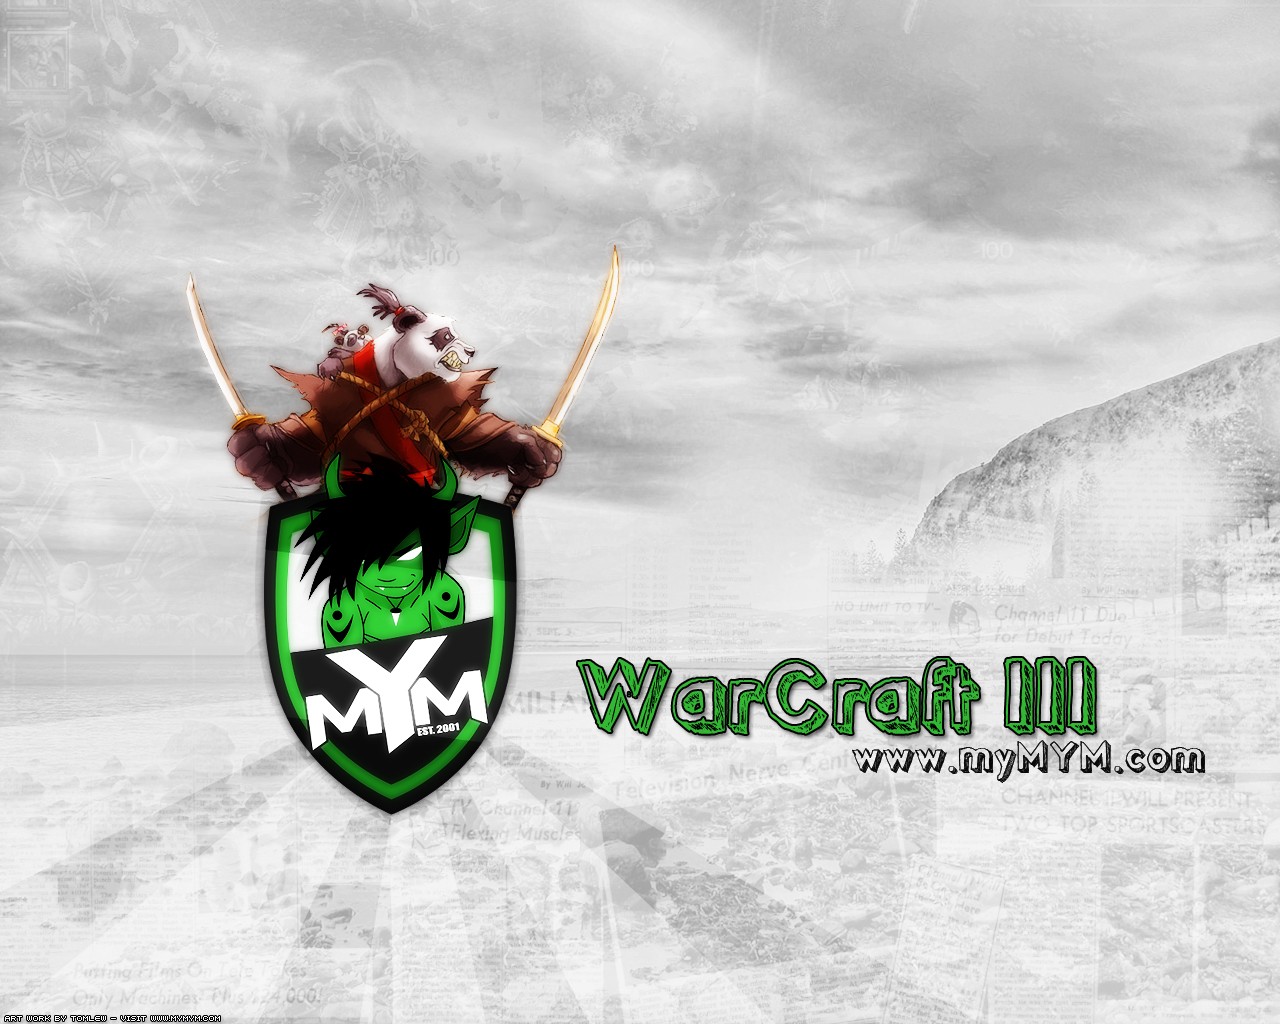 General 1280x1024 Meet Your Makers Warcraft III PC gaming logo